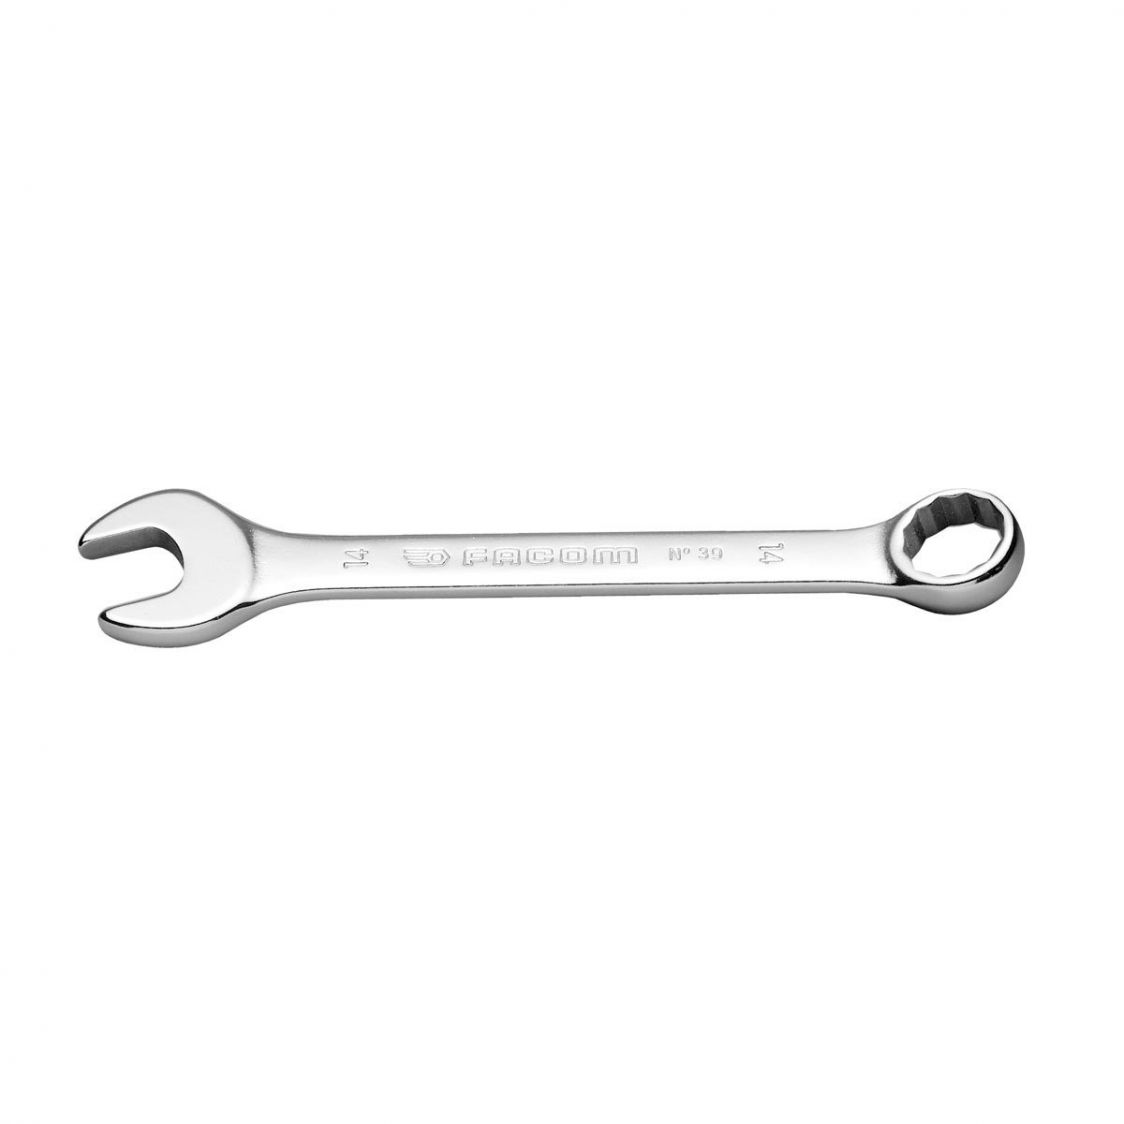 FACOM 39.13 - 13mm Metric Stubby Combination Spanner